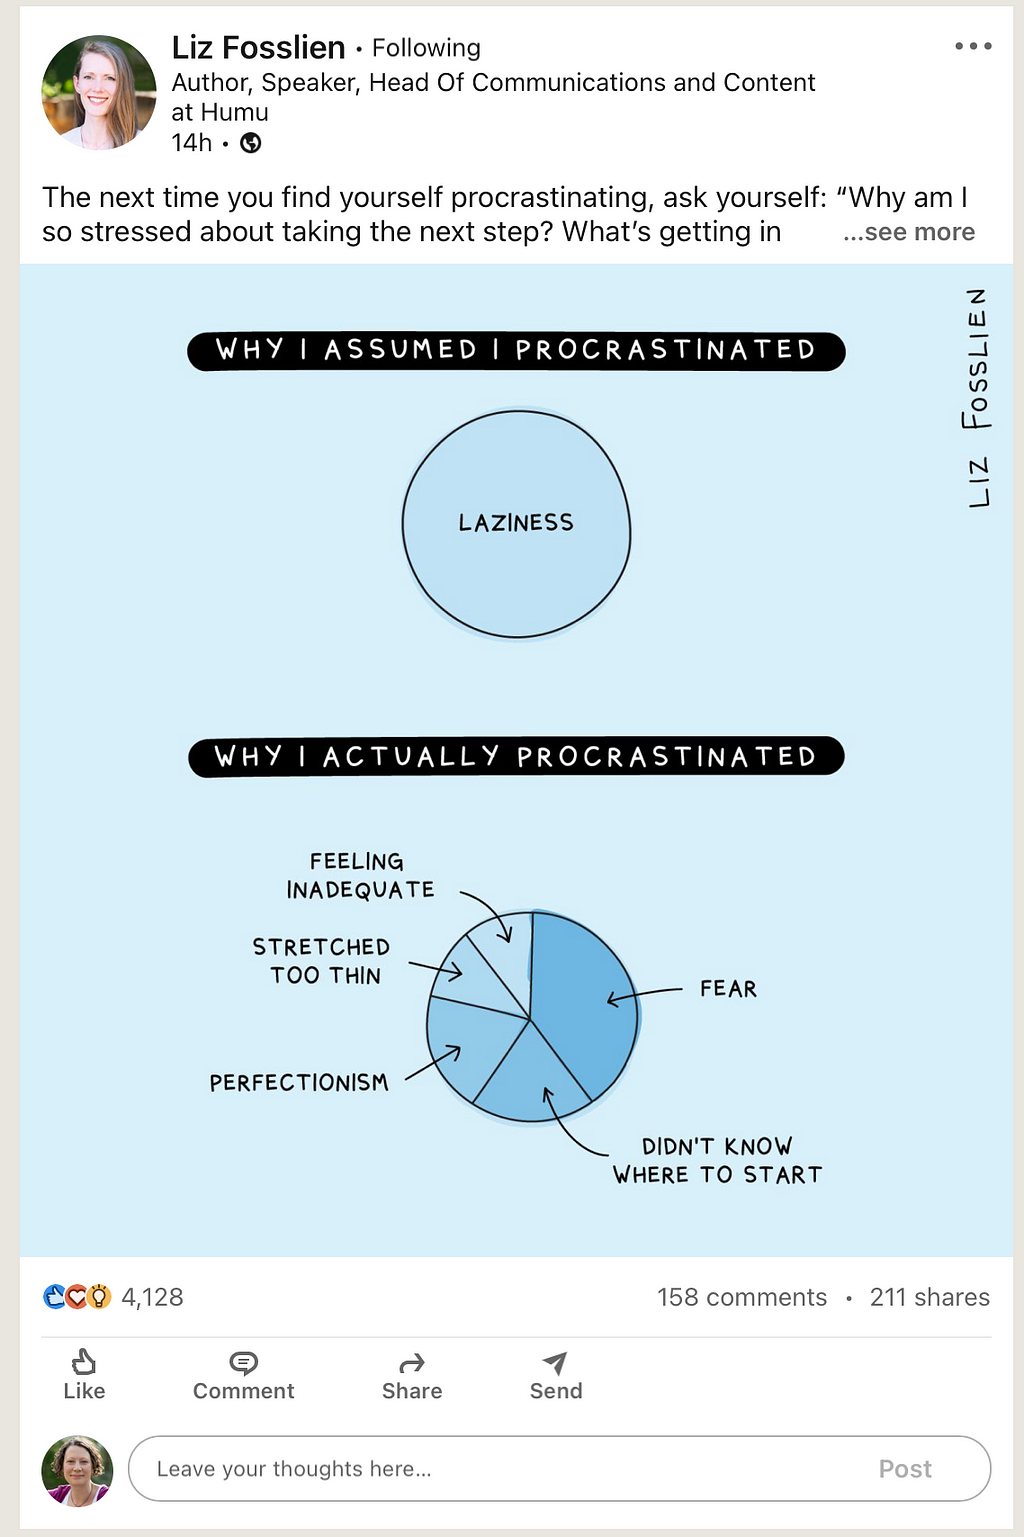 A diagram of why we procrastinate, including feeling inadequate, fear, perfectionism and not knowing where to start.